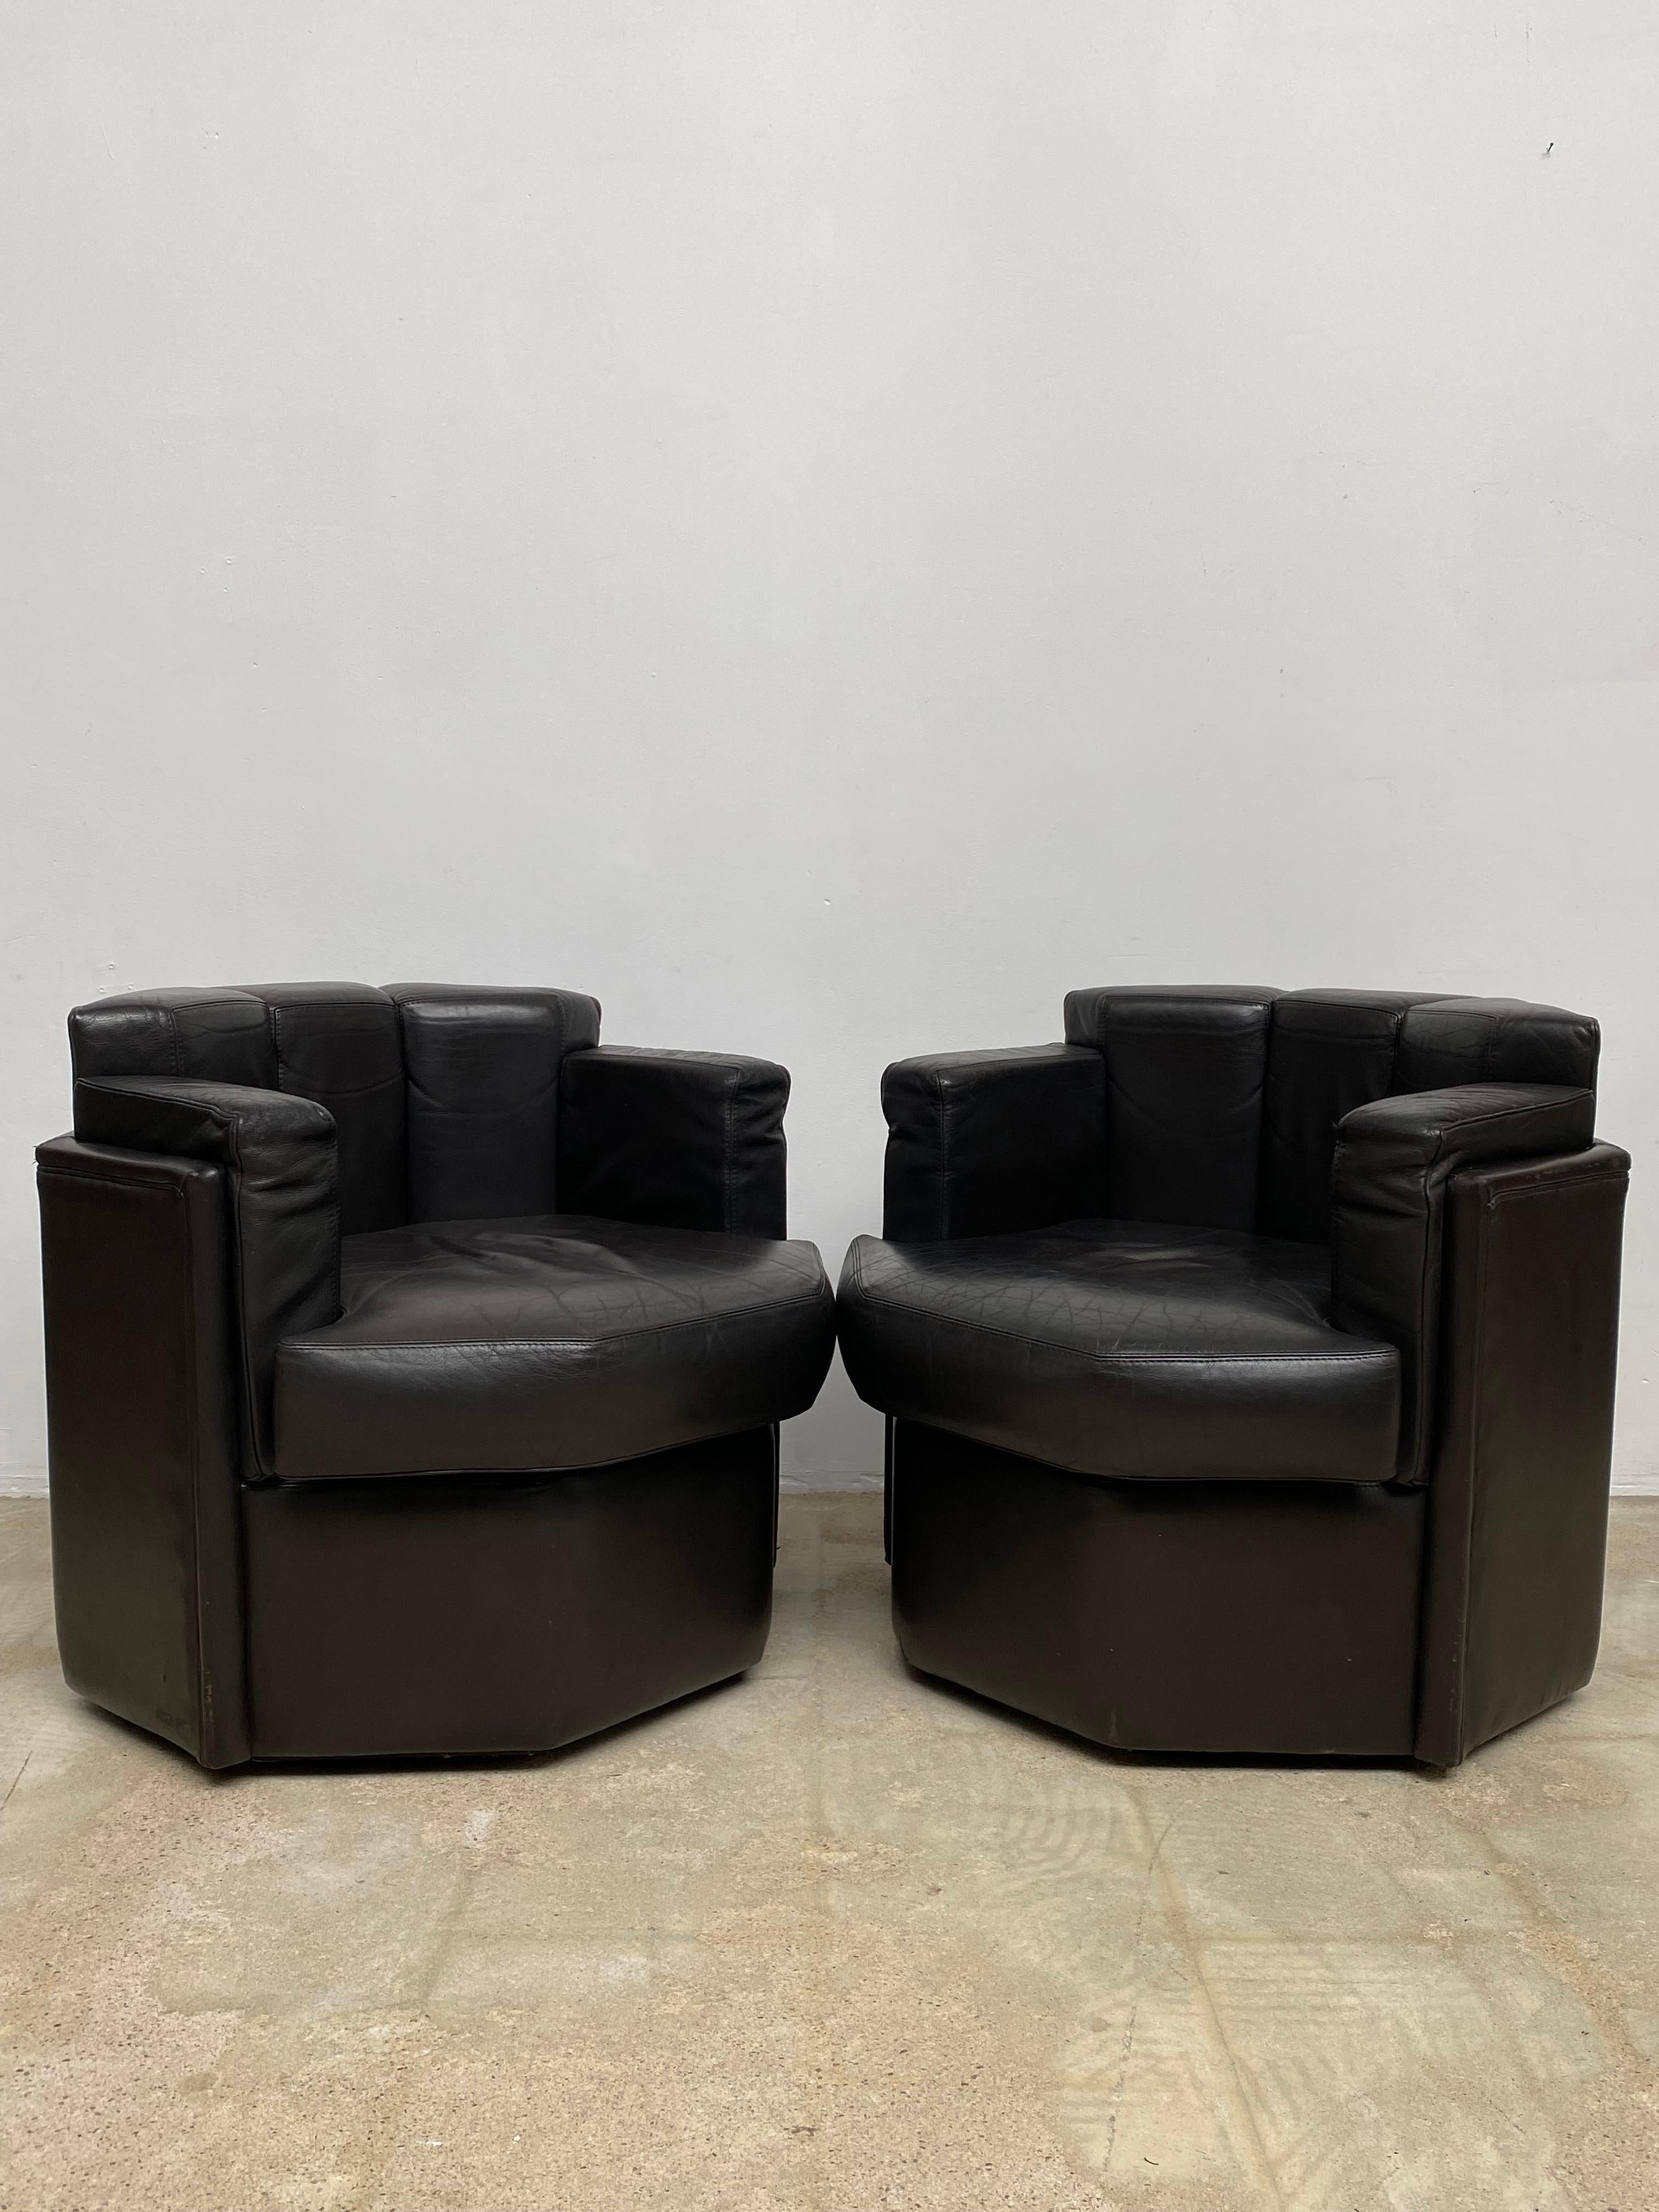 Set of Dark Brown Octagonal Club Chairs, 1970s For Sale 2